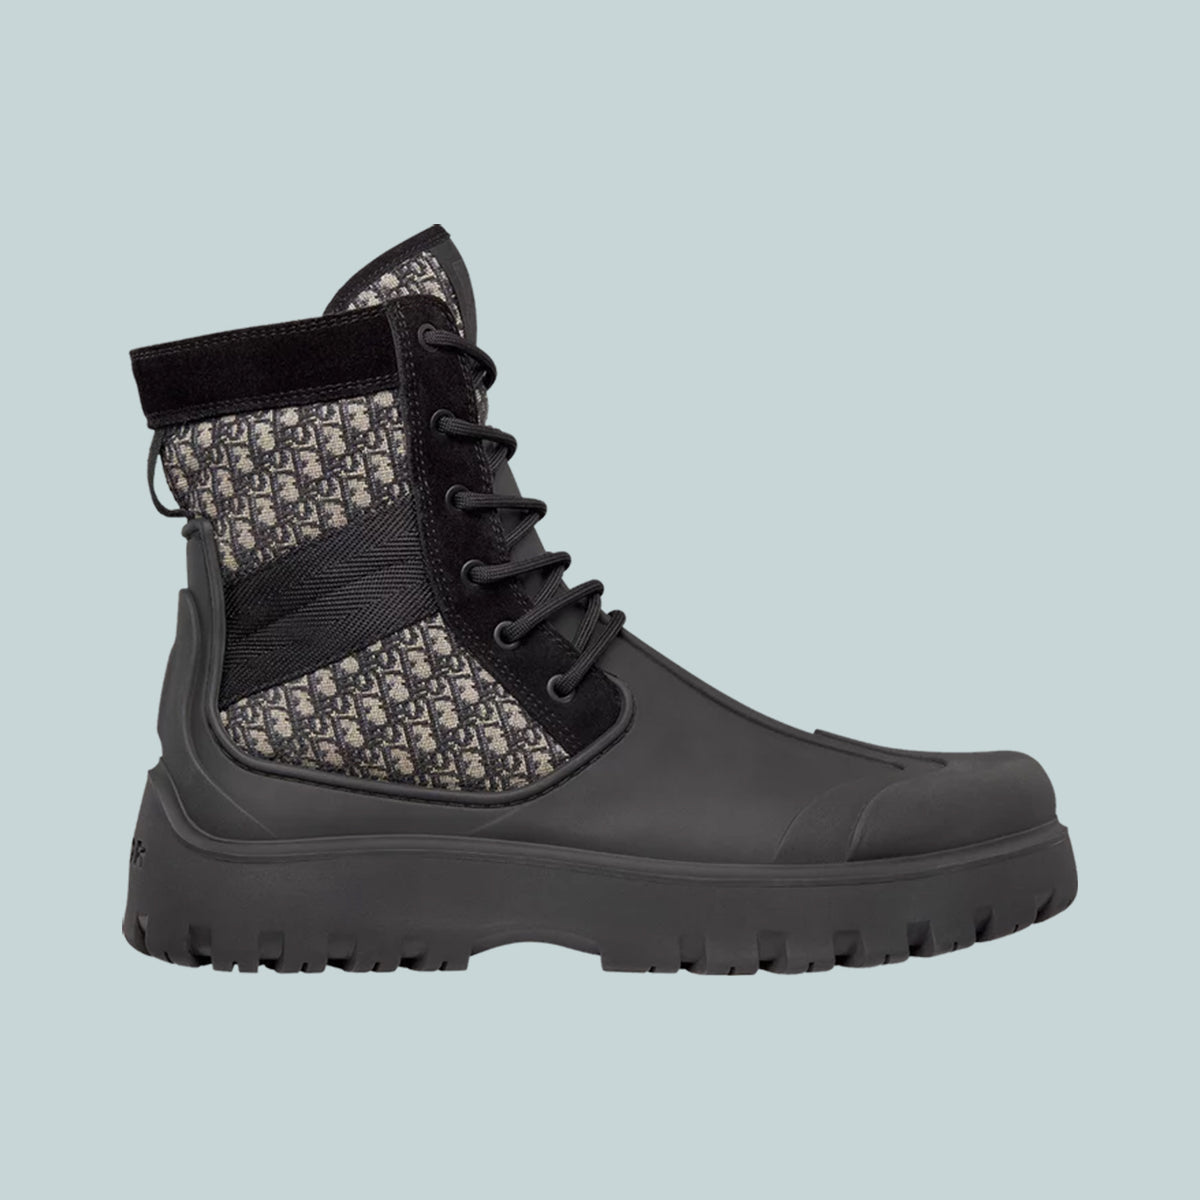 Garden Lace-Up Boots Black